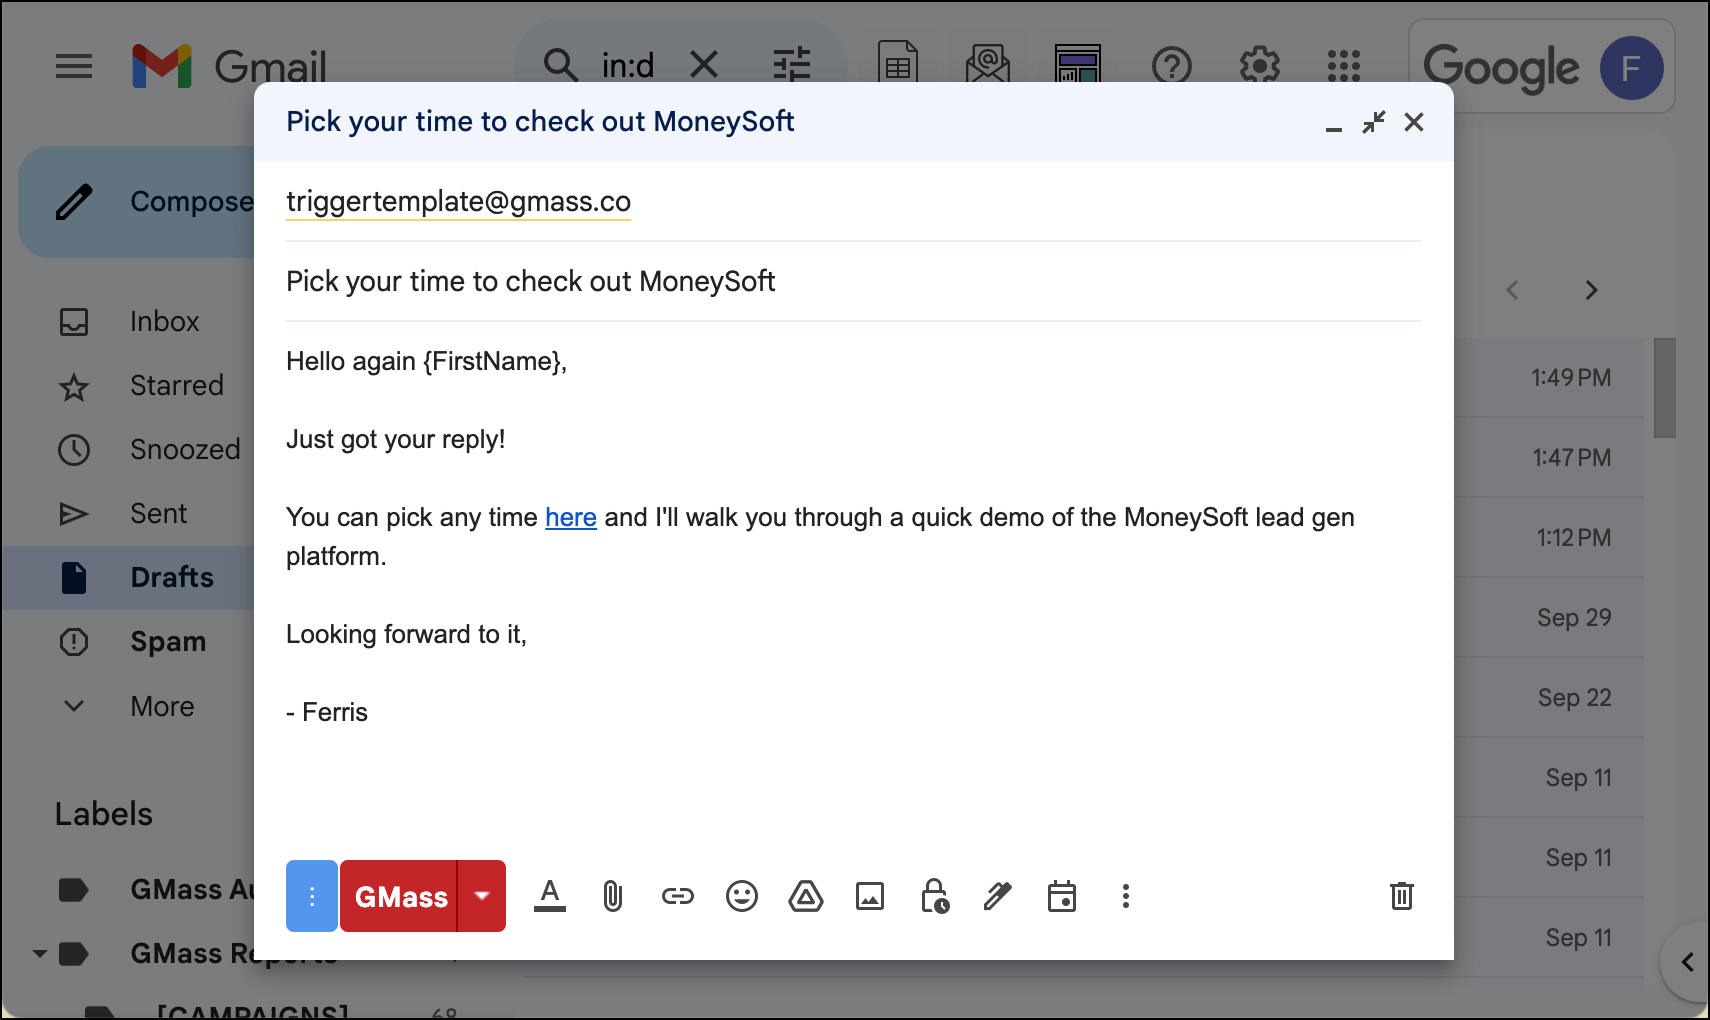 The triggered email encouraging someone to book a time